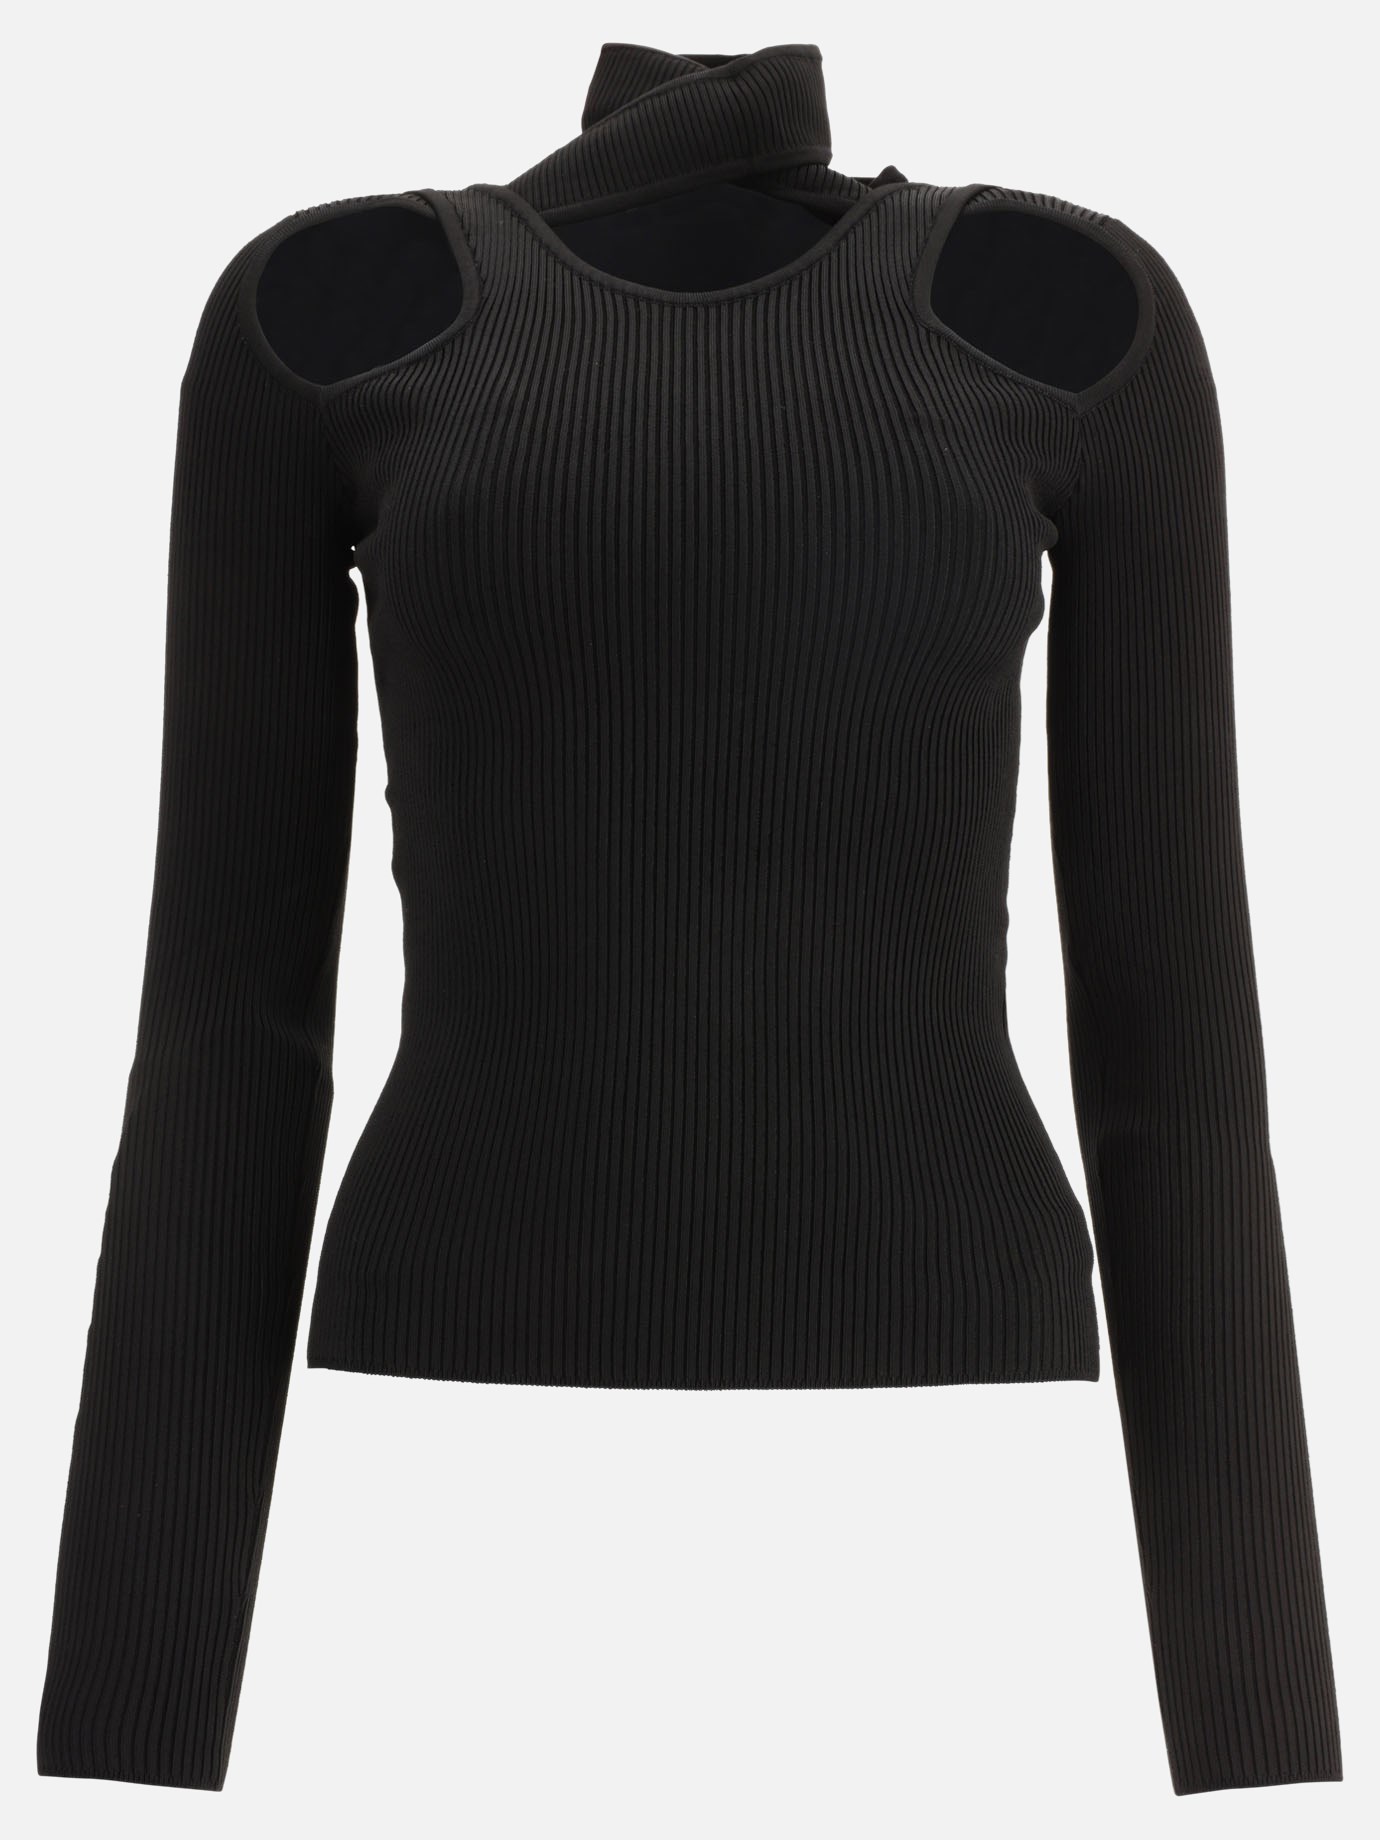 Cut-out turtleneck sweater